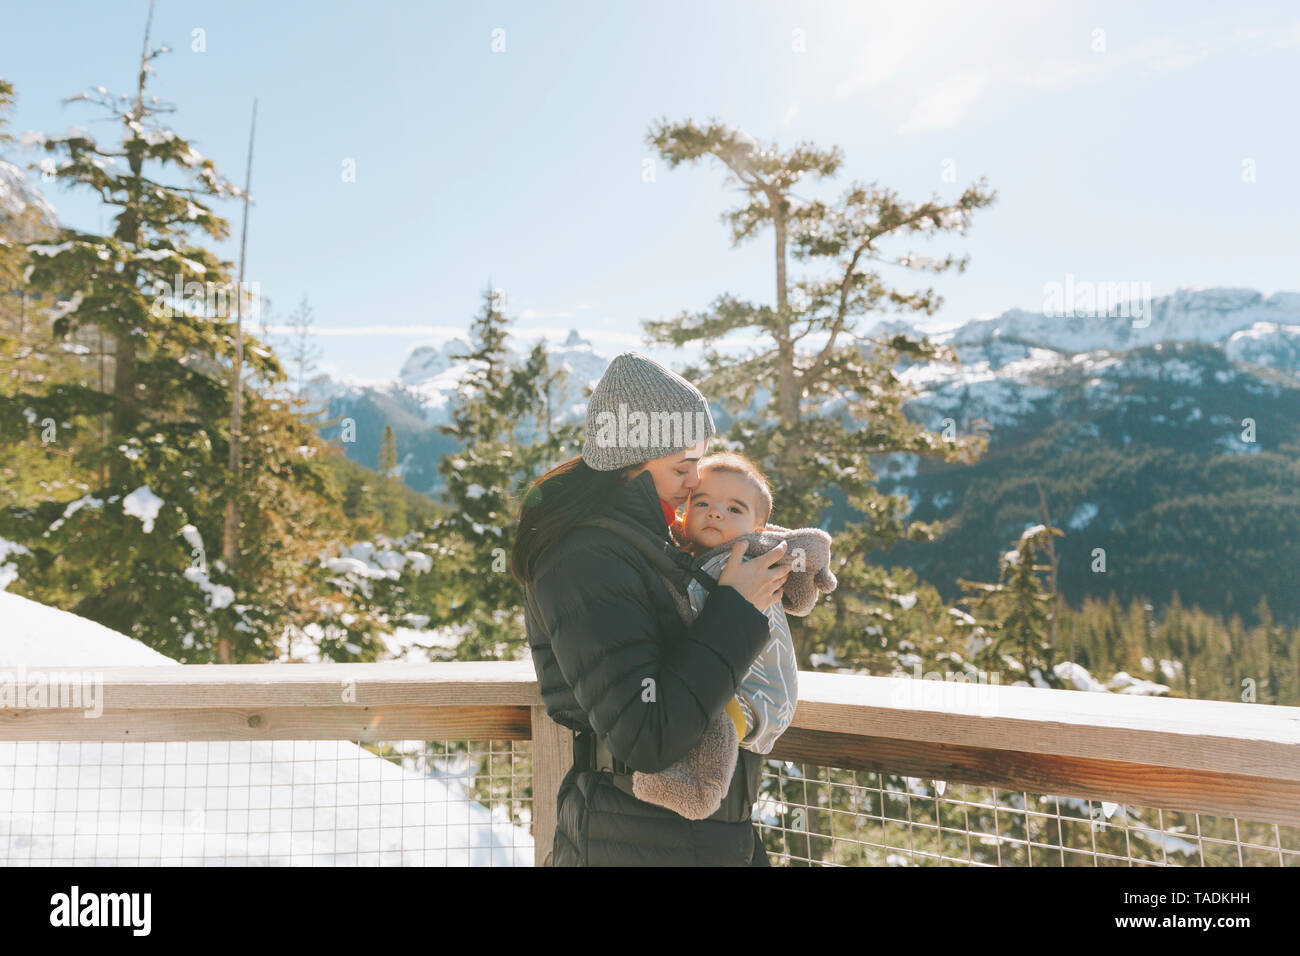 Mother holding her baby son on an observation deck, looking over Squamish, Canada Stock Photo